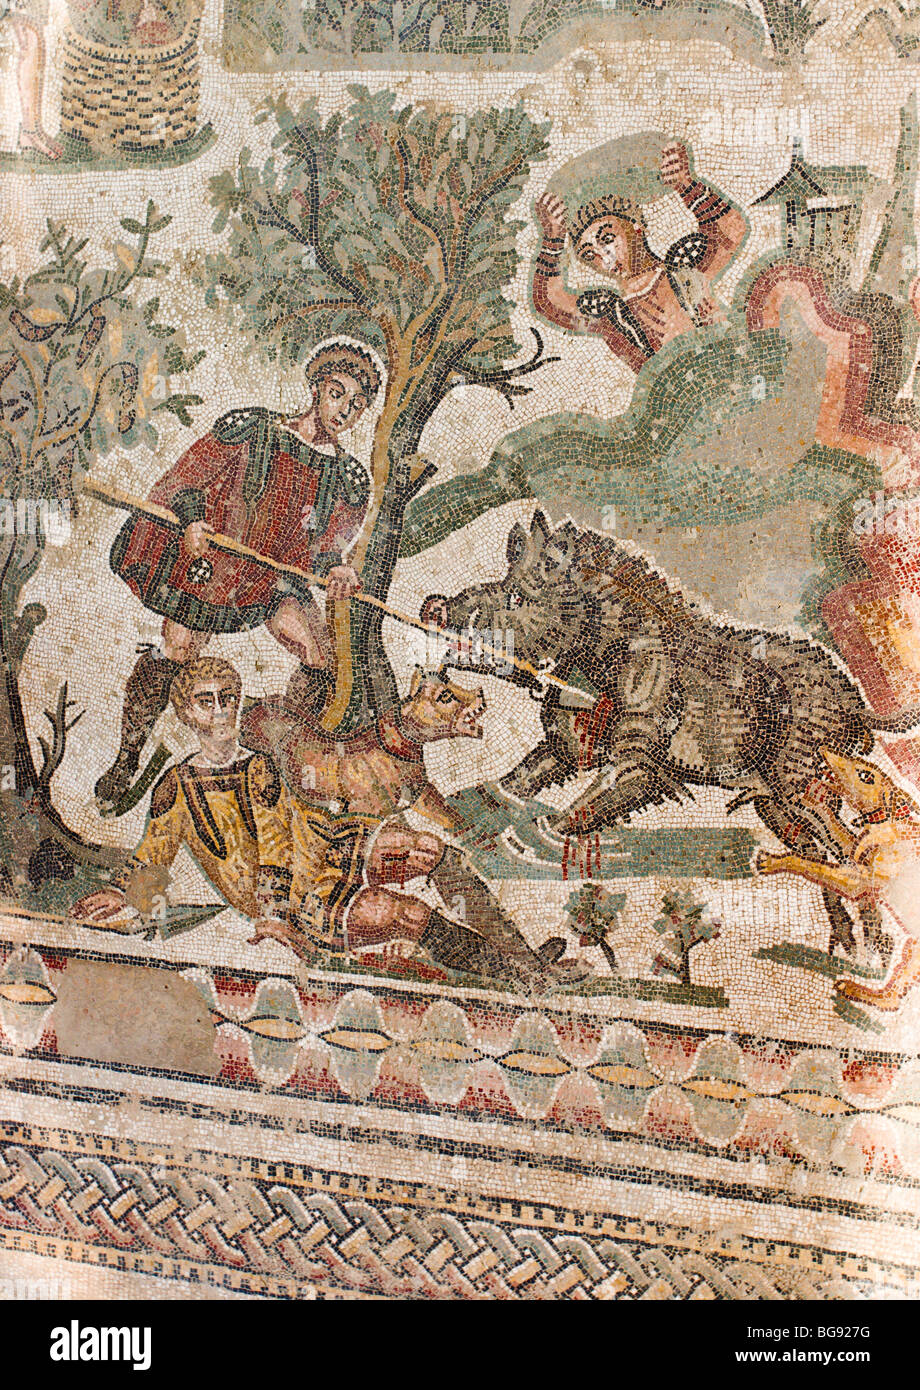 The Wild Boar Hunt mosaic detail. A man lifts a rock high above his head to strike a wild boar dead while another uses a spear Stock Photo